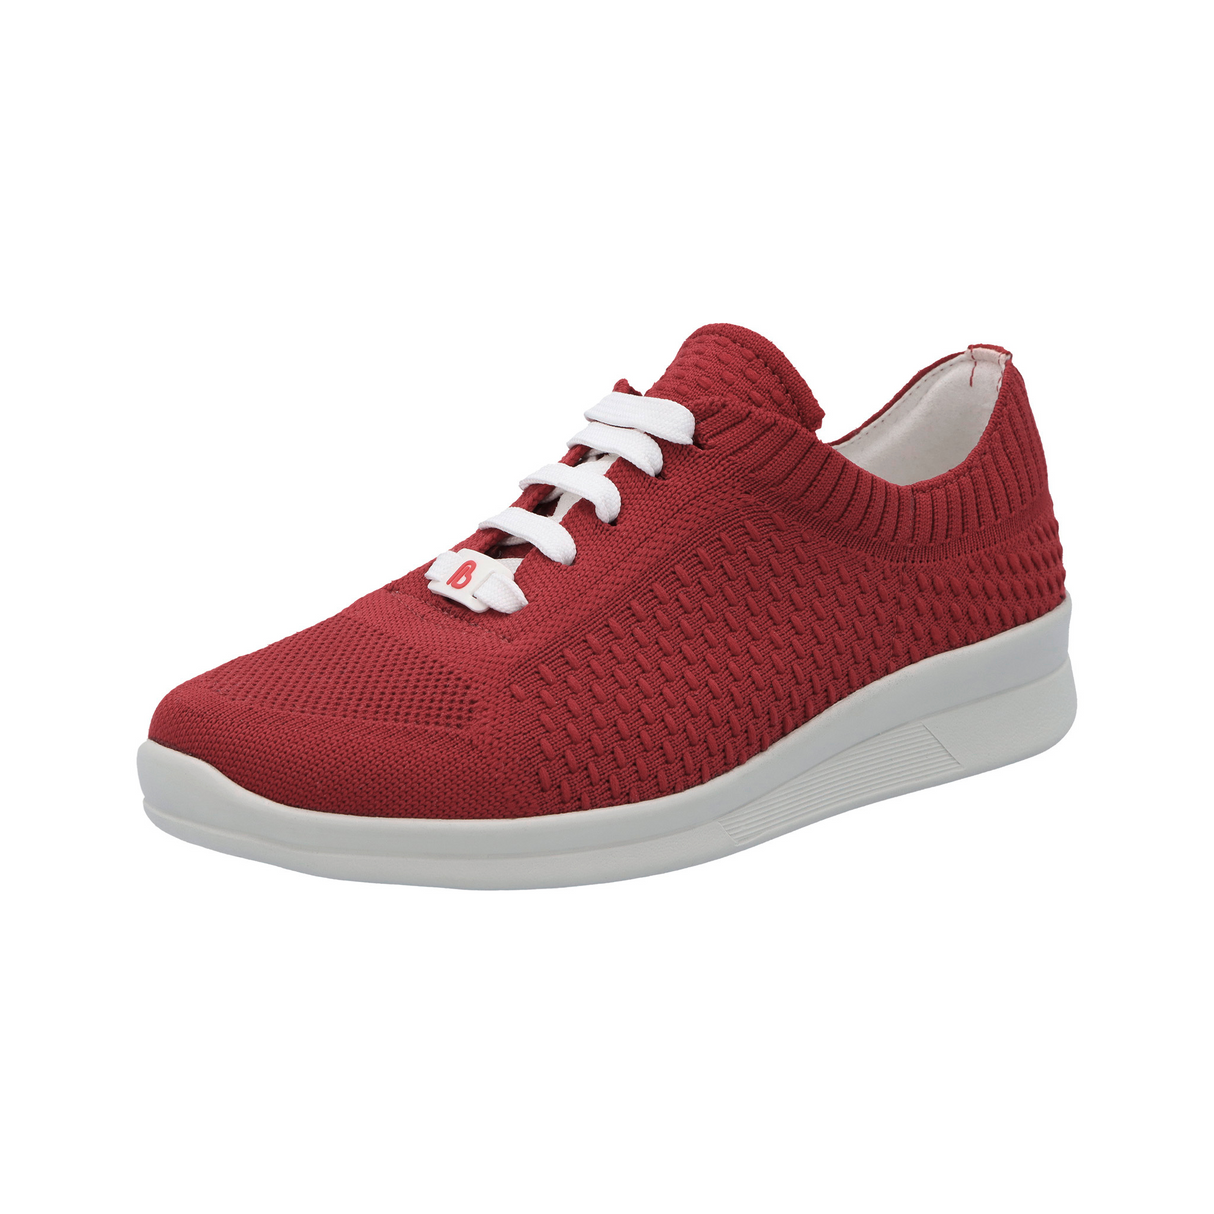 Lillian | Casual shoes | Berry red